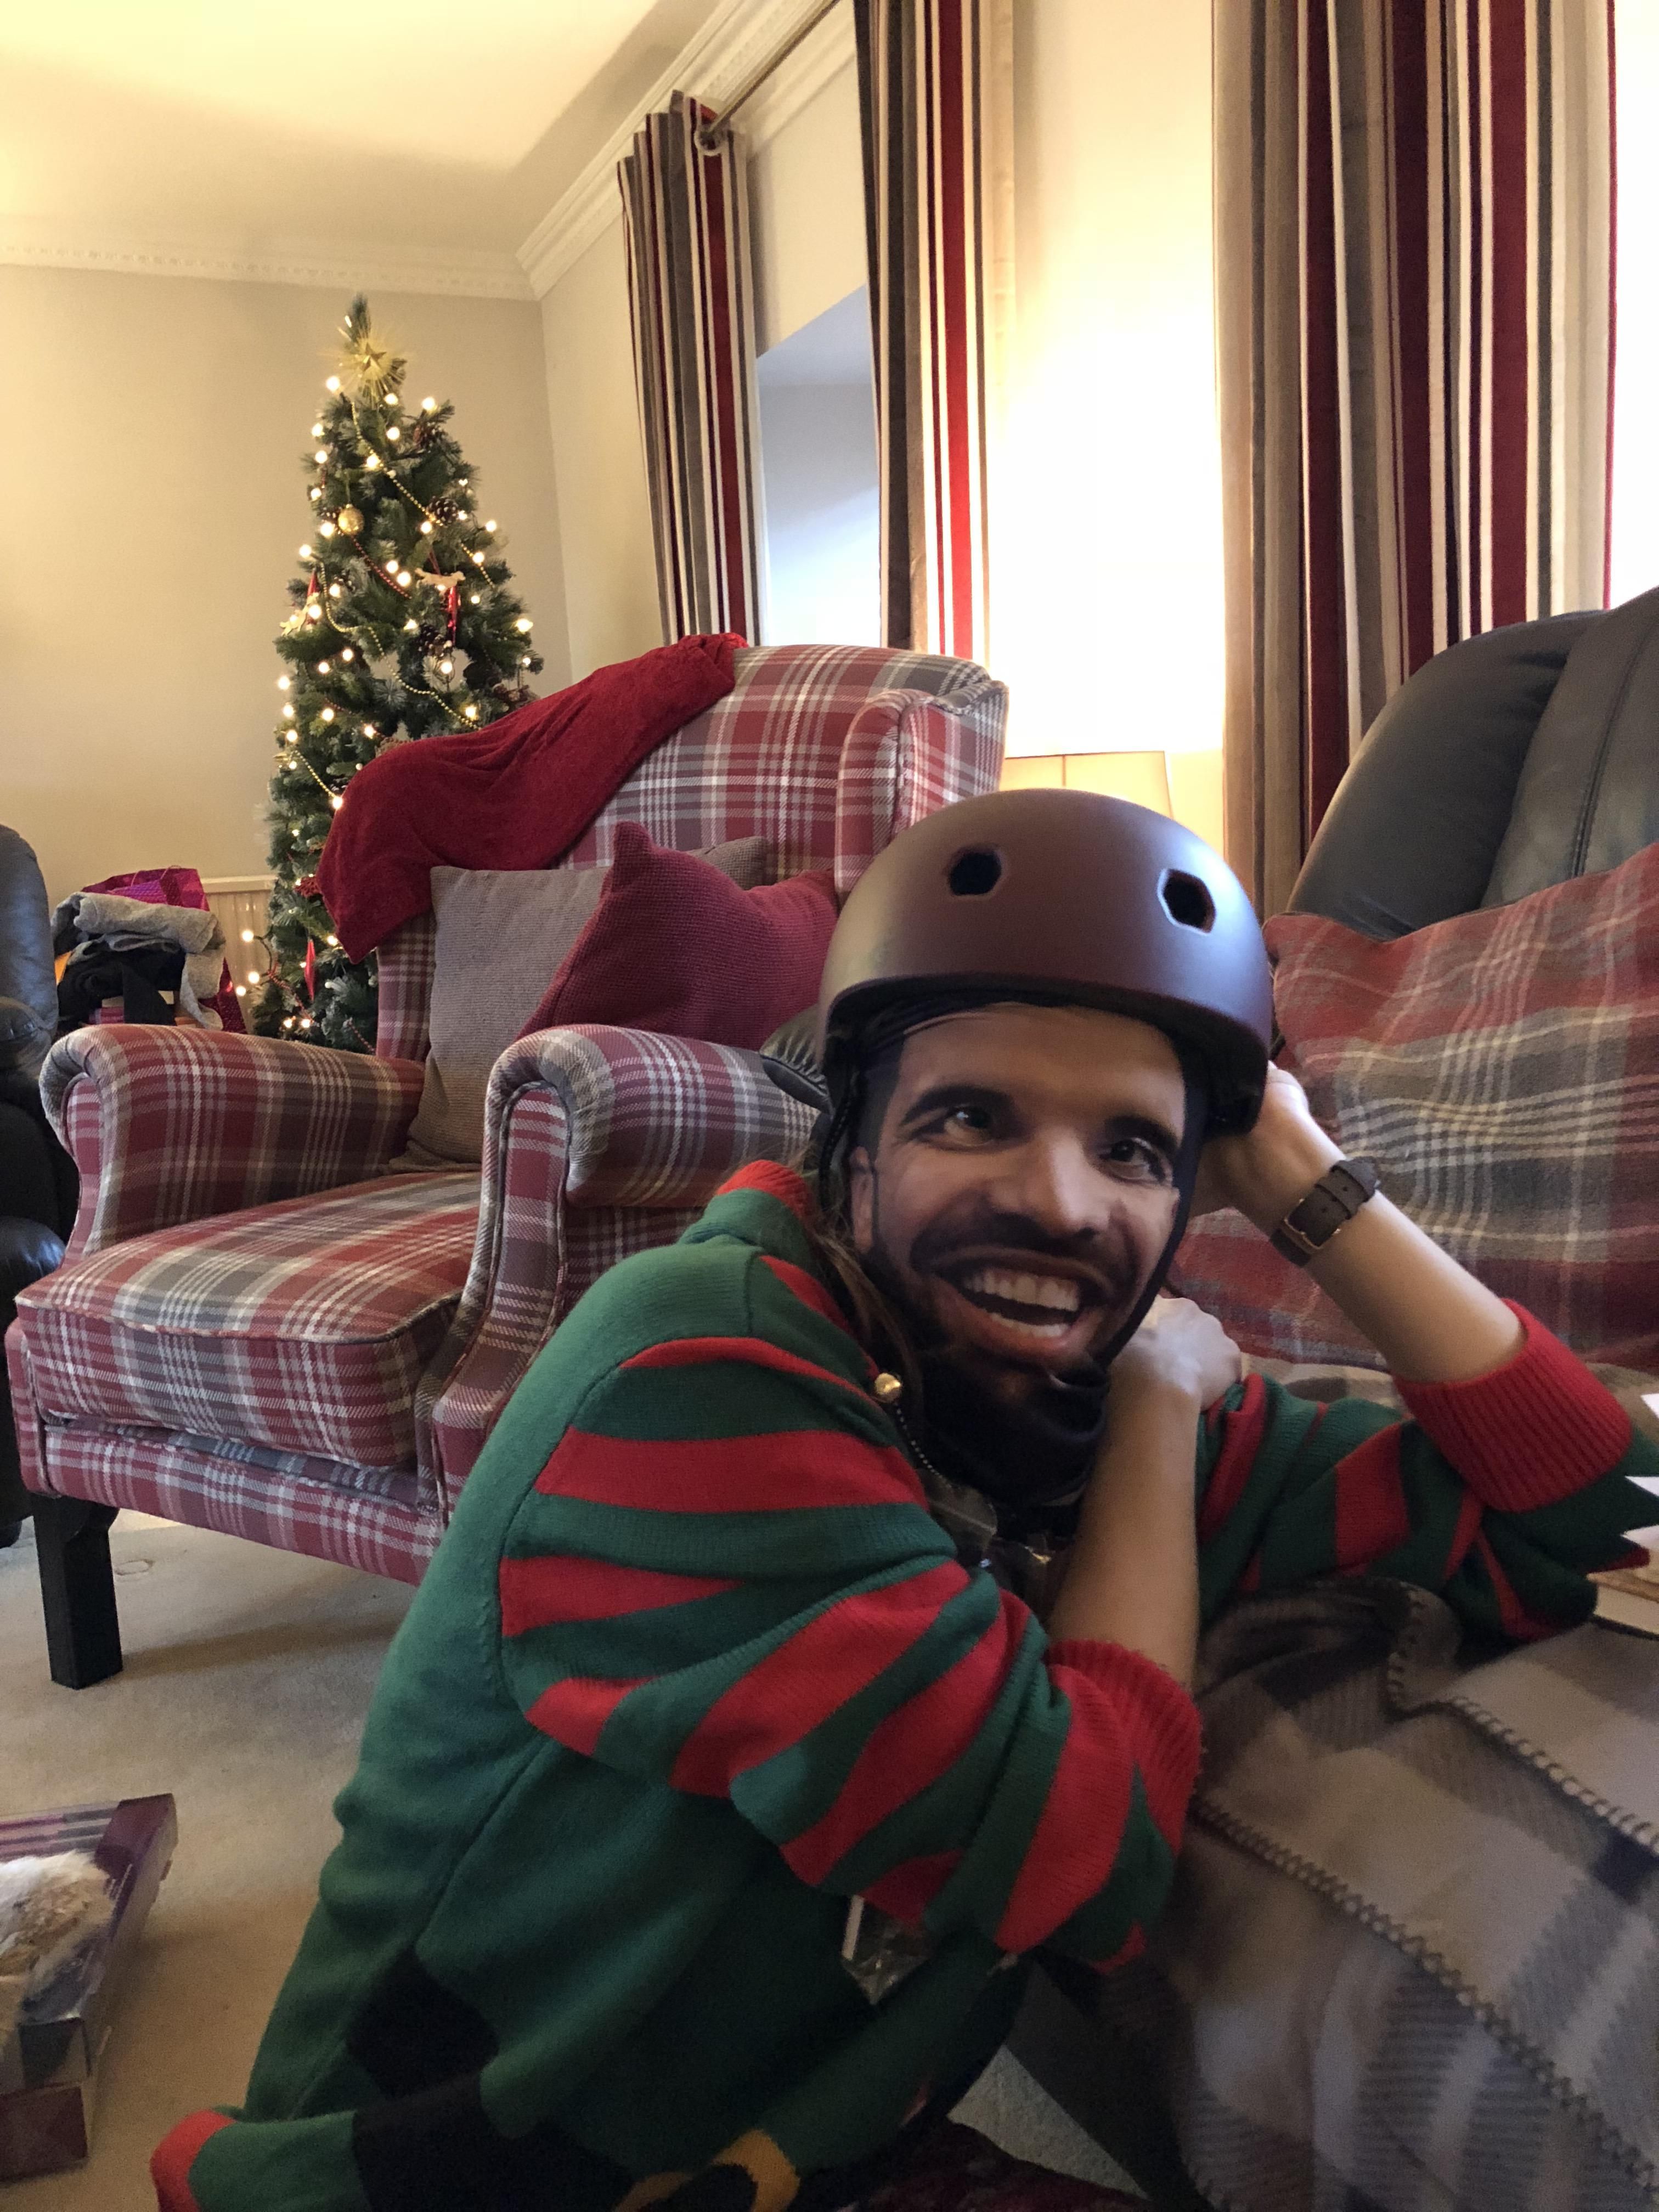 I got my gf a new bike helmet, my brother-in-law got her a Drake face-print balaclava and now she looks like a custom video game character